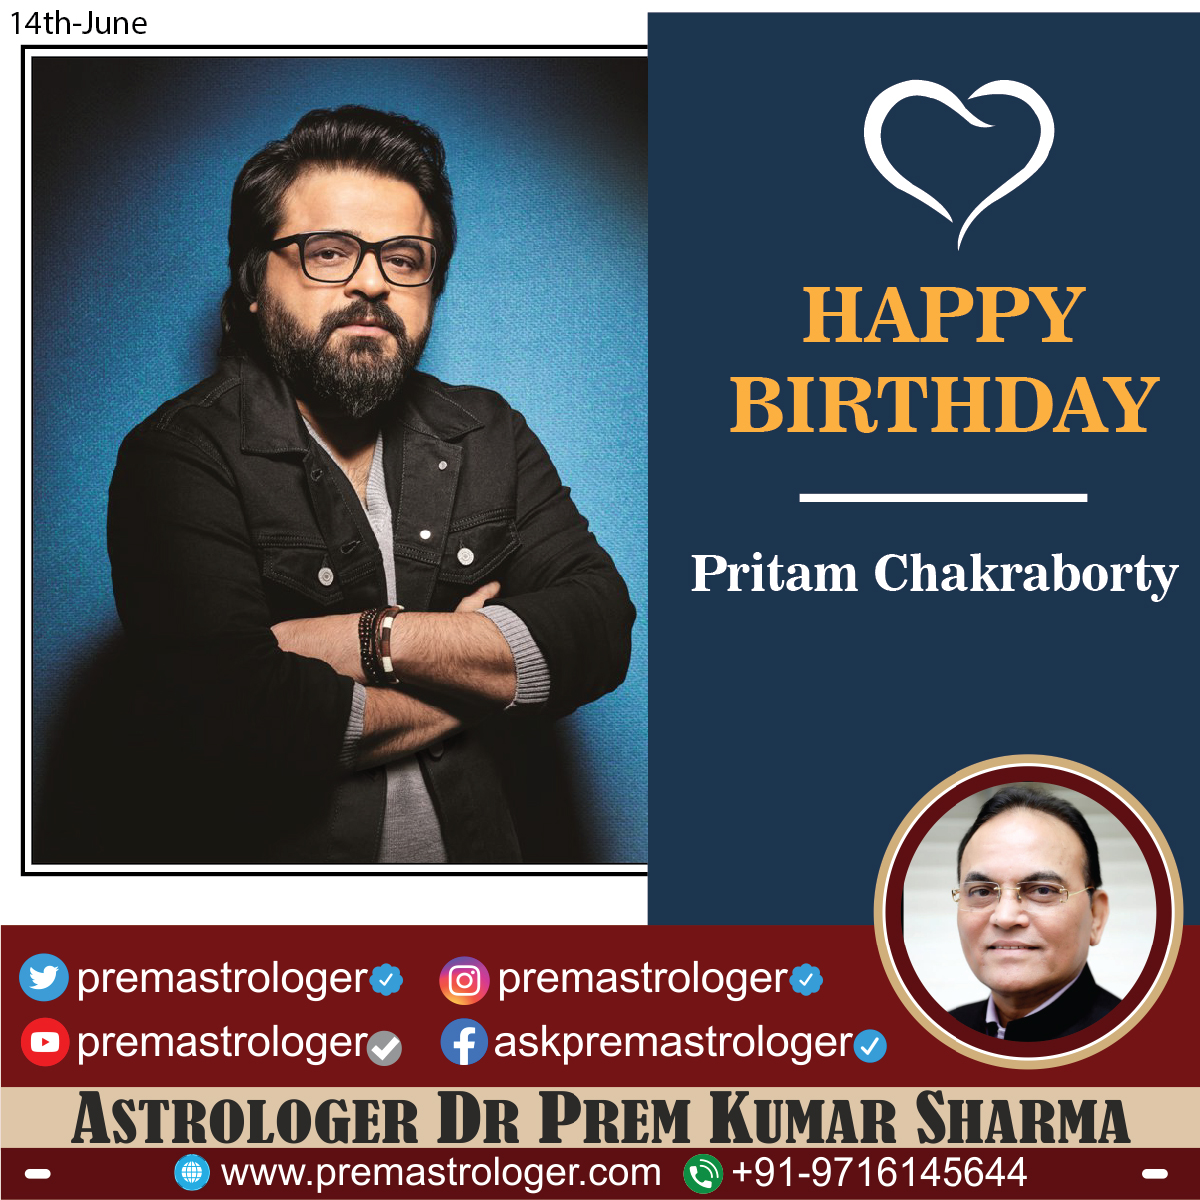 Celebrated composer, instrumentalist, guitarist & singer Pritam Chakraborty has rewritten the rules of the music industry with his blockbuster music and songs. Wishing U a year bright with promise & filled with success! #HappyBirthday GBY!
@ipritamofficial

#Singer
#HBDPritam